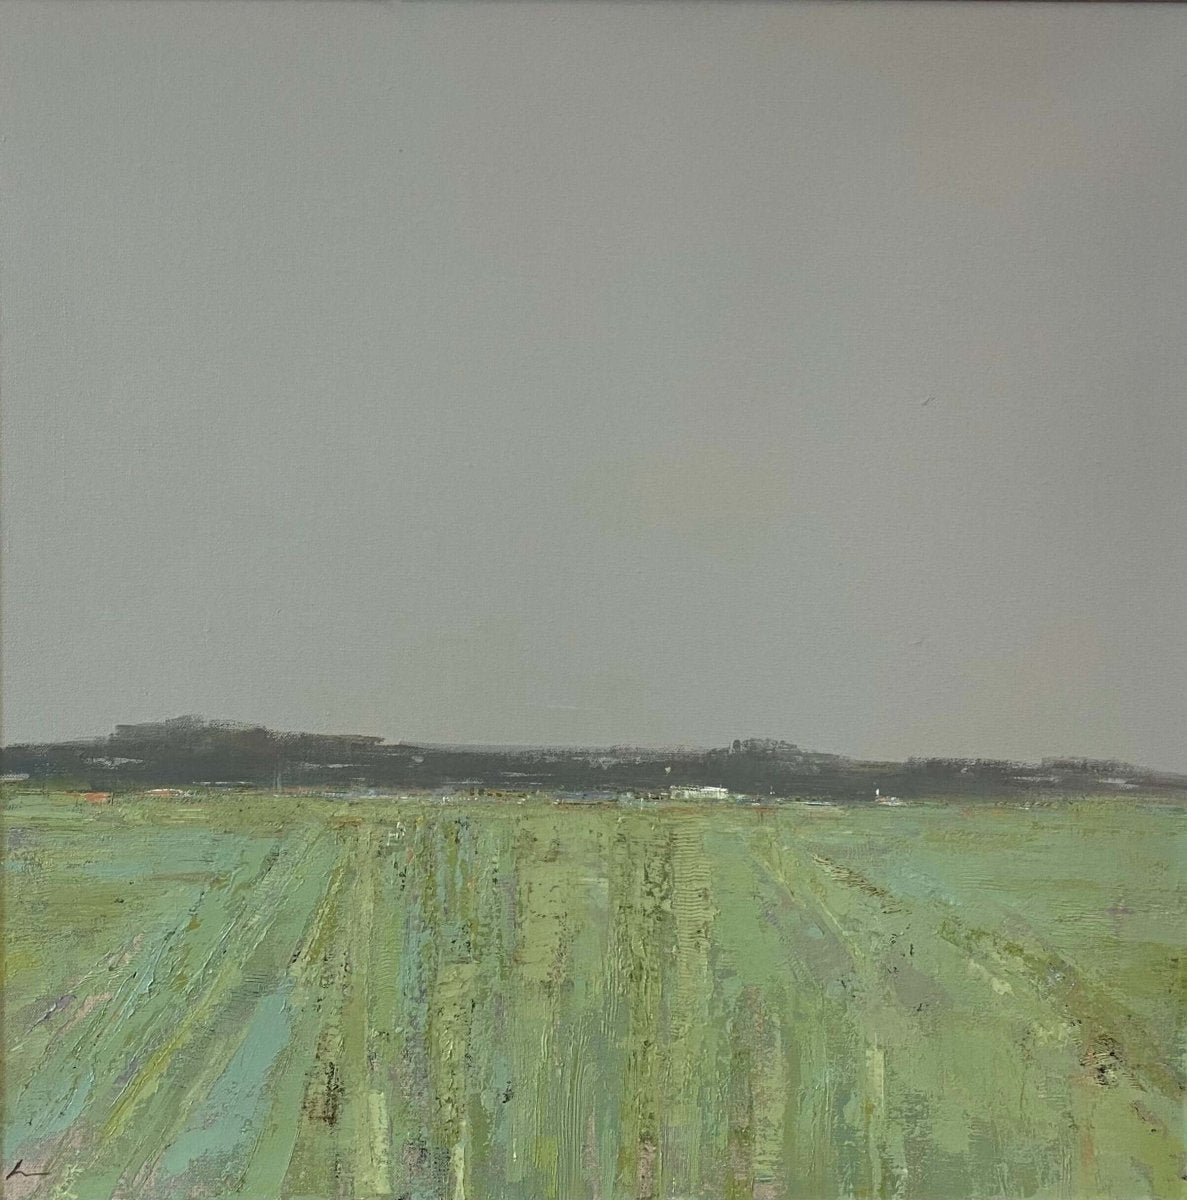 Field and Farm Series #15 by Deborah Hill at LePrince Galleries